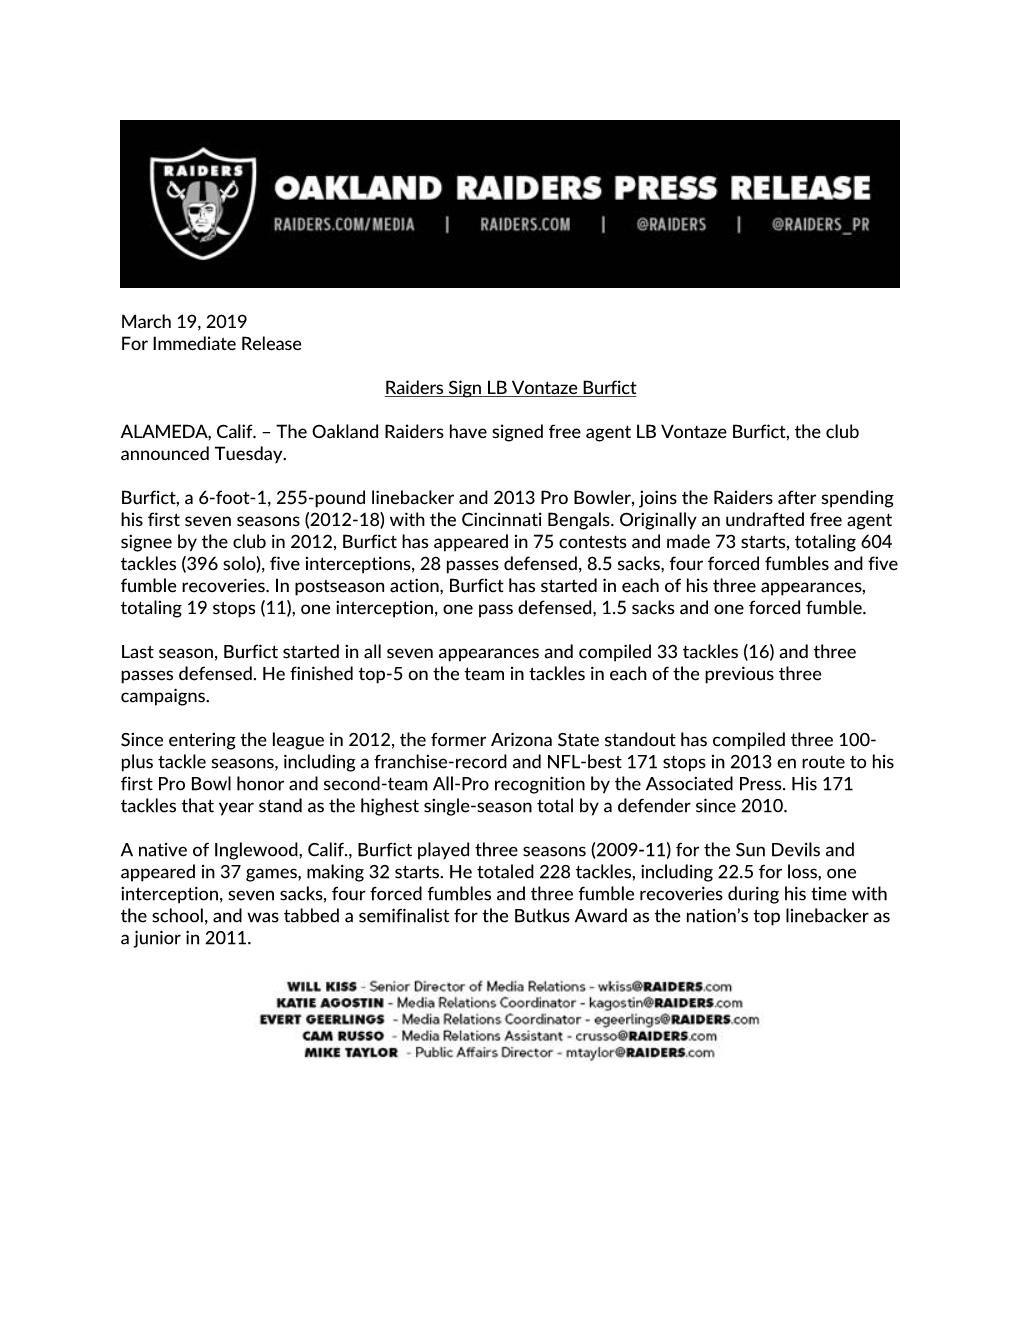 March 19, 2019 for Immediate Release Raiders Sign